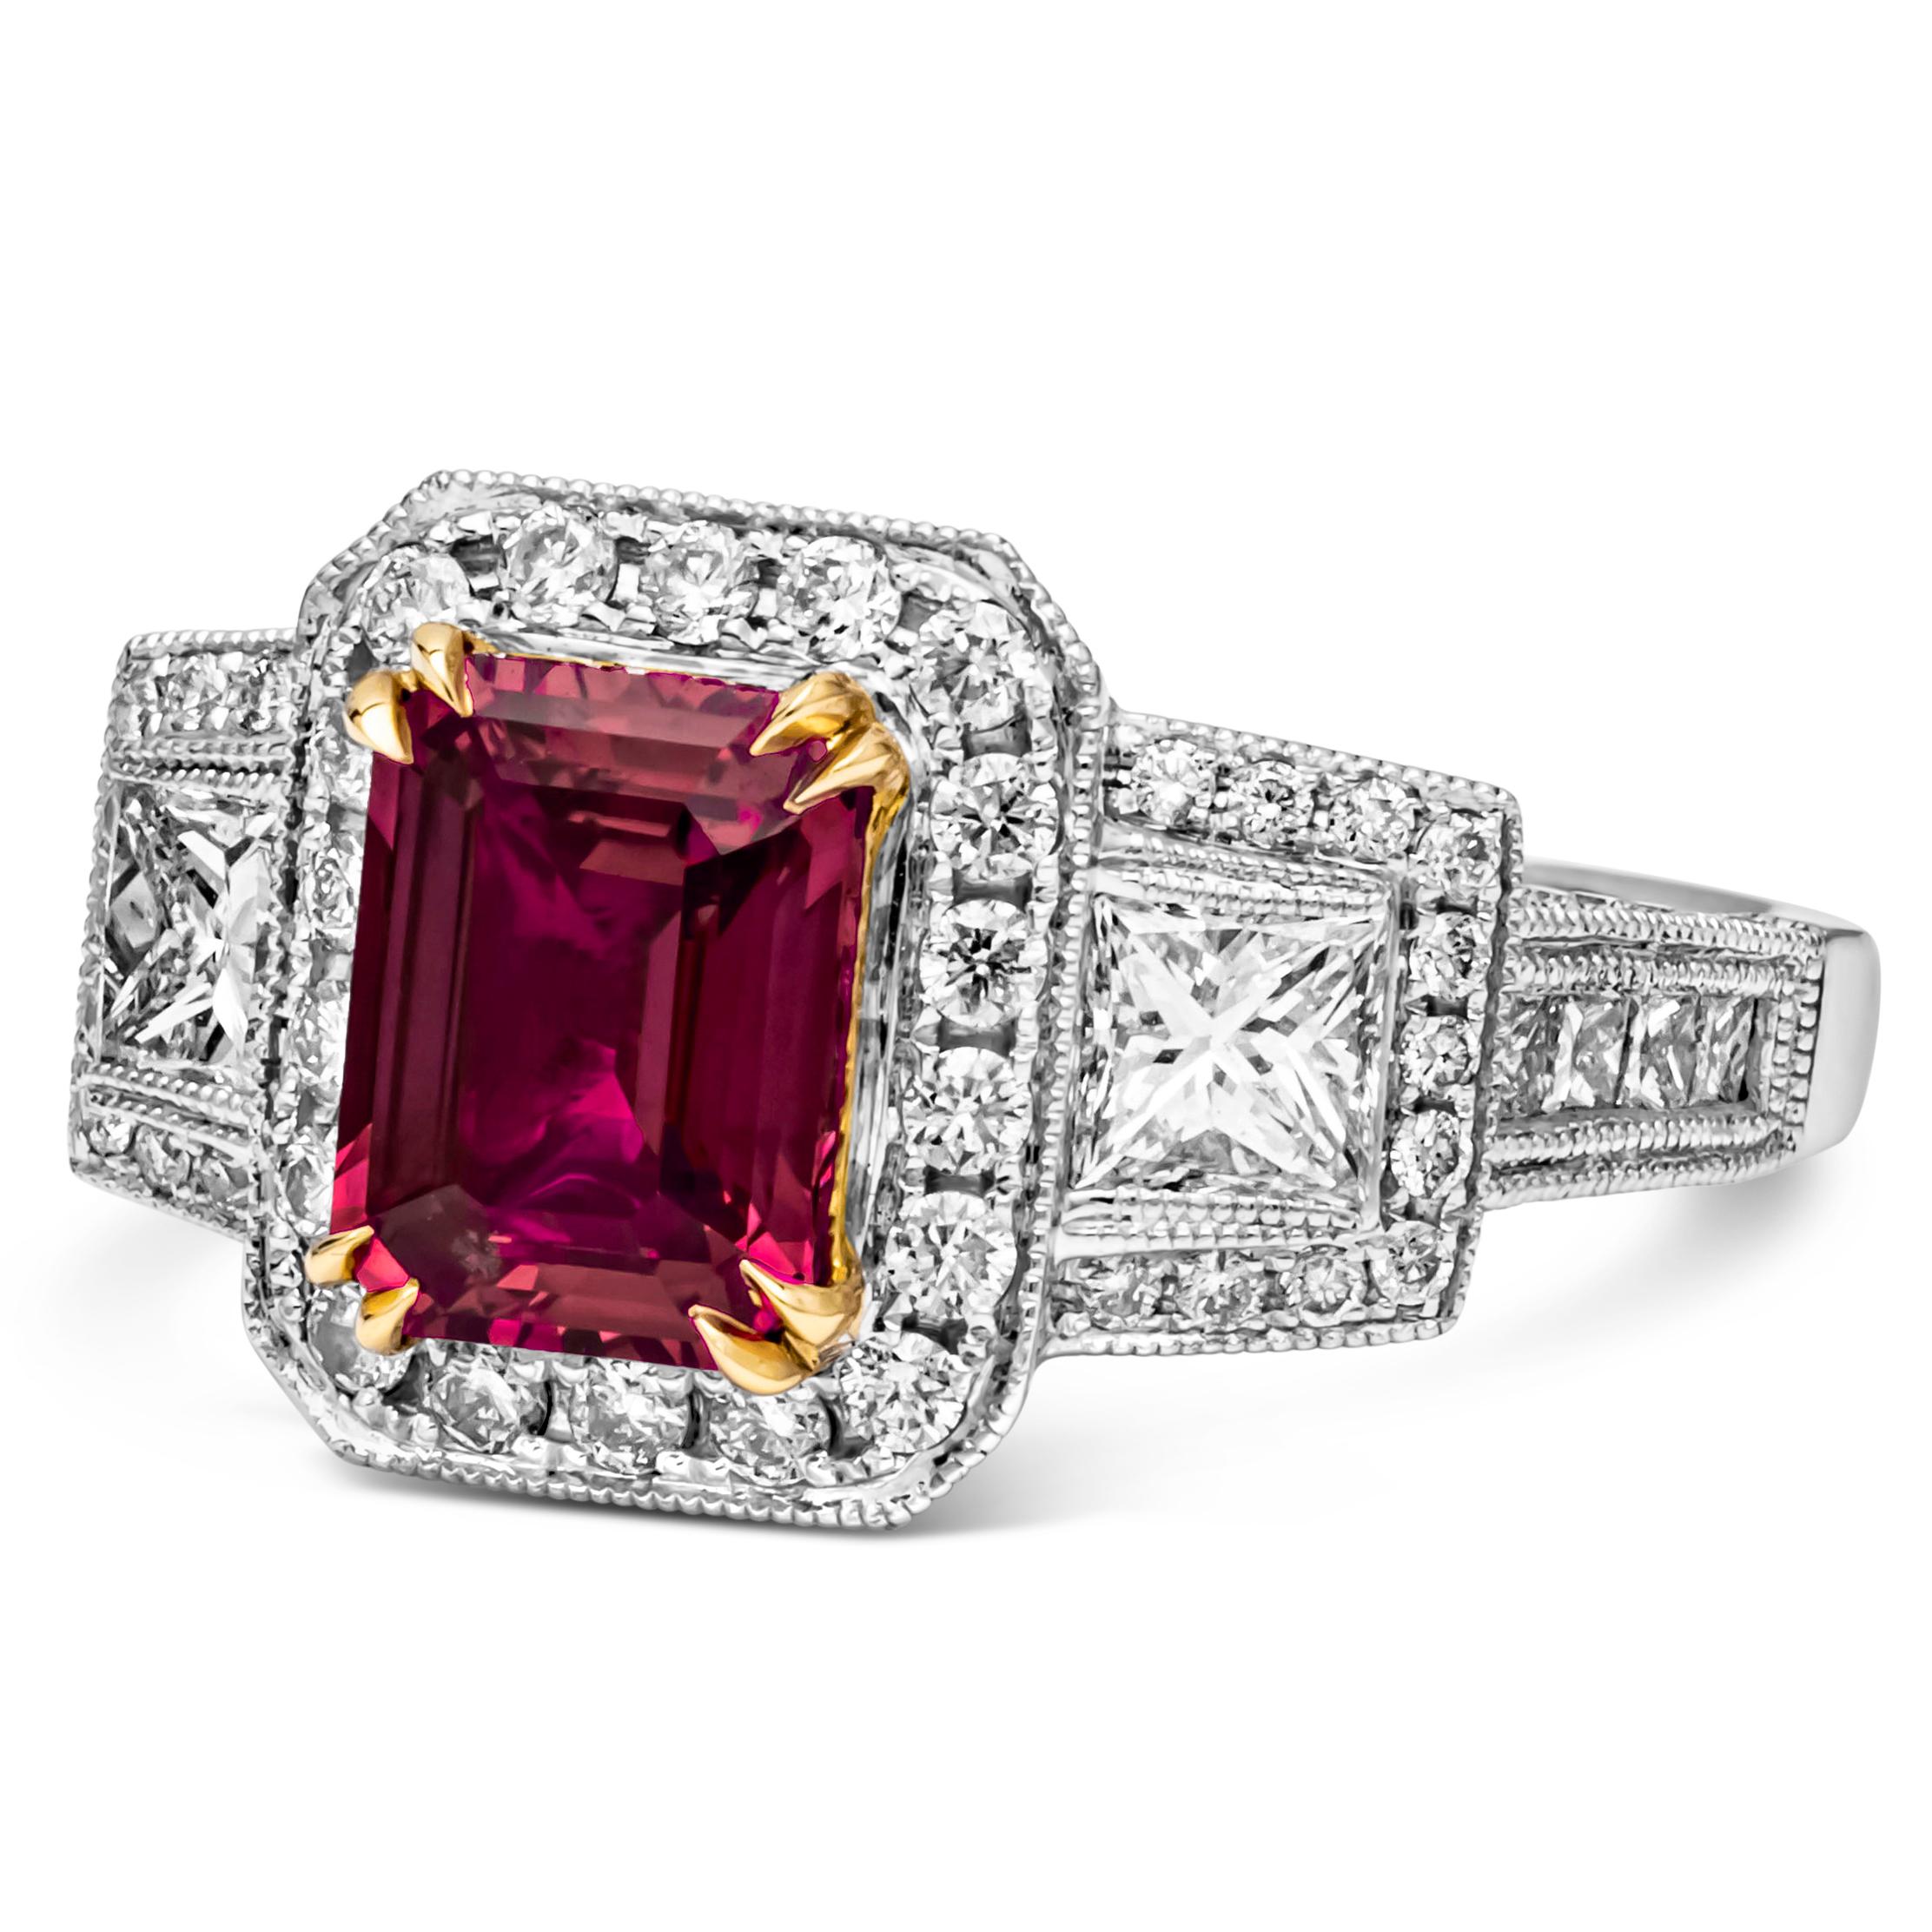 This stunning and beautiful three stone halo engagement ring features a GIA certified 2.03 carats emerald cut ruby, set in a classic eight prong setting. Flanked by two princess cut diamonds on each side weighing 0.60 carats total, F color and VS-SI